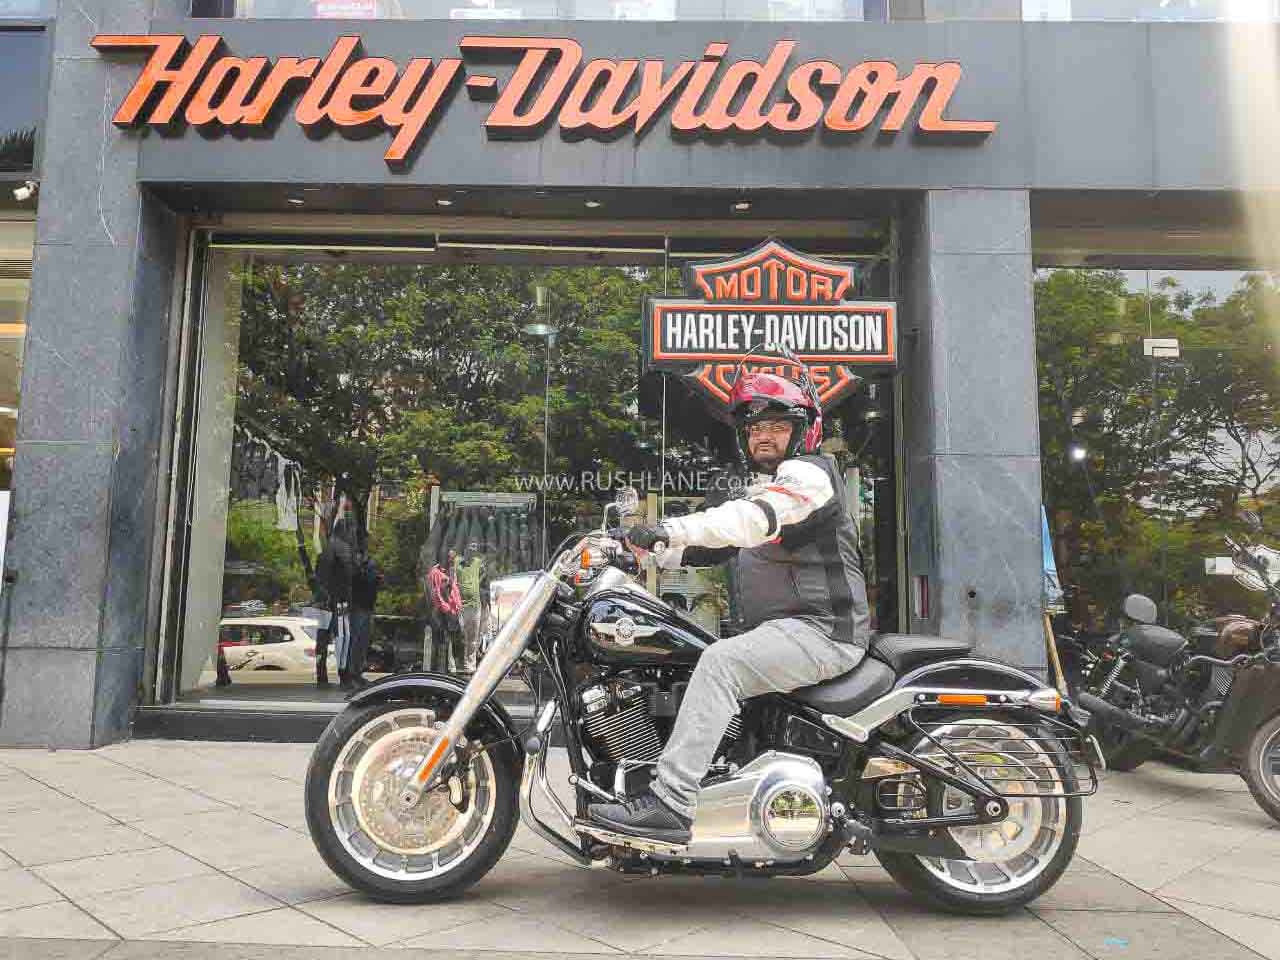 Harley Davidson Dealers May Decrease Due To Partnerships With Heroes India News Republic